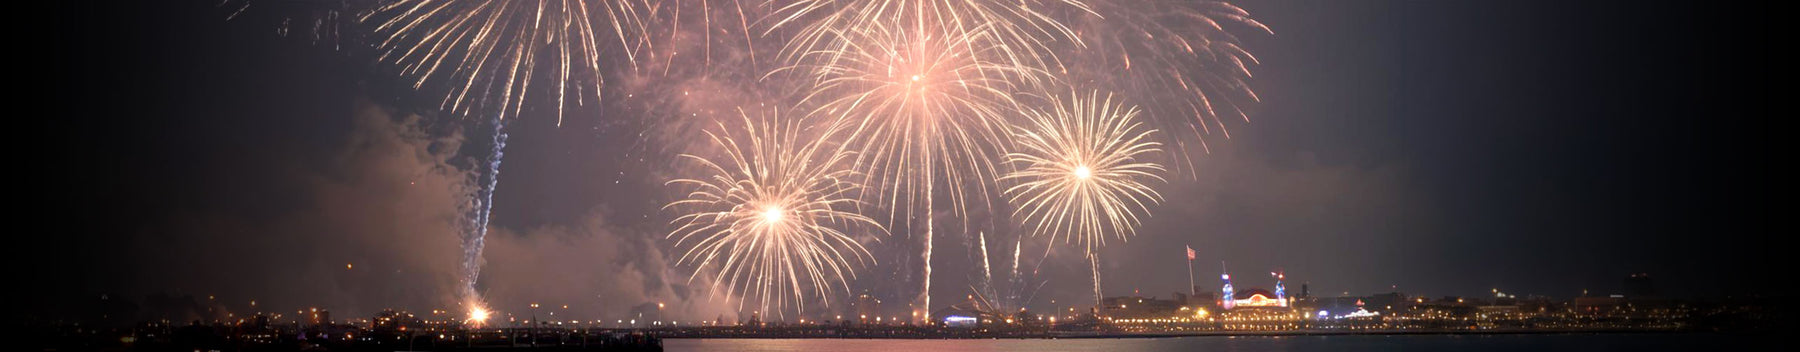 Top 10 Places to Watch Fireworks in the USA